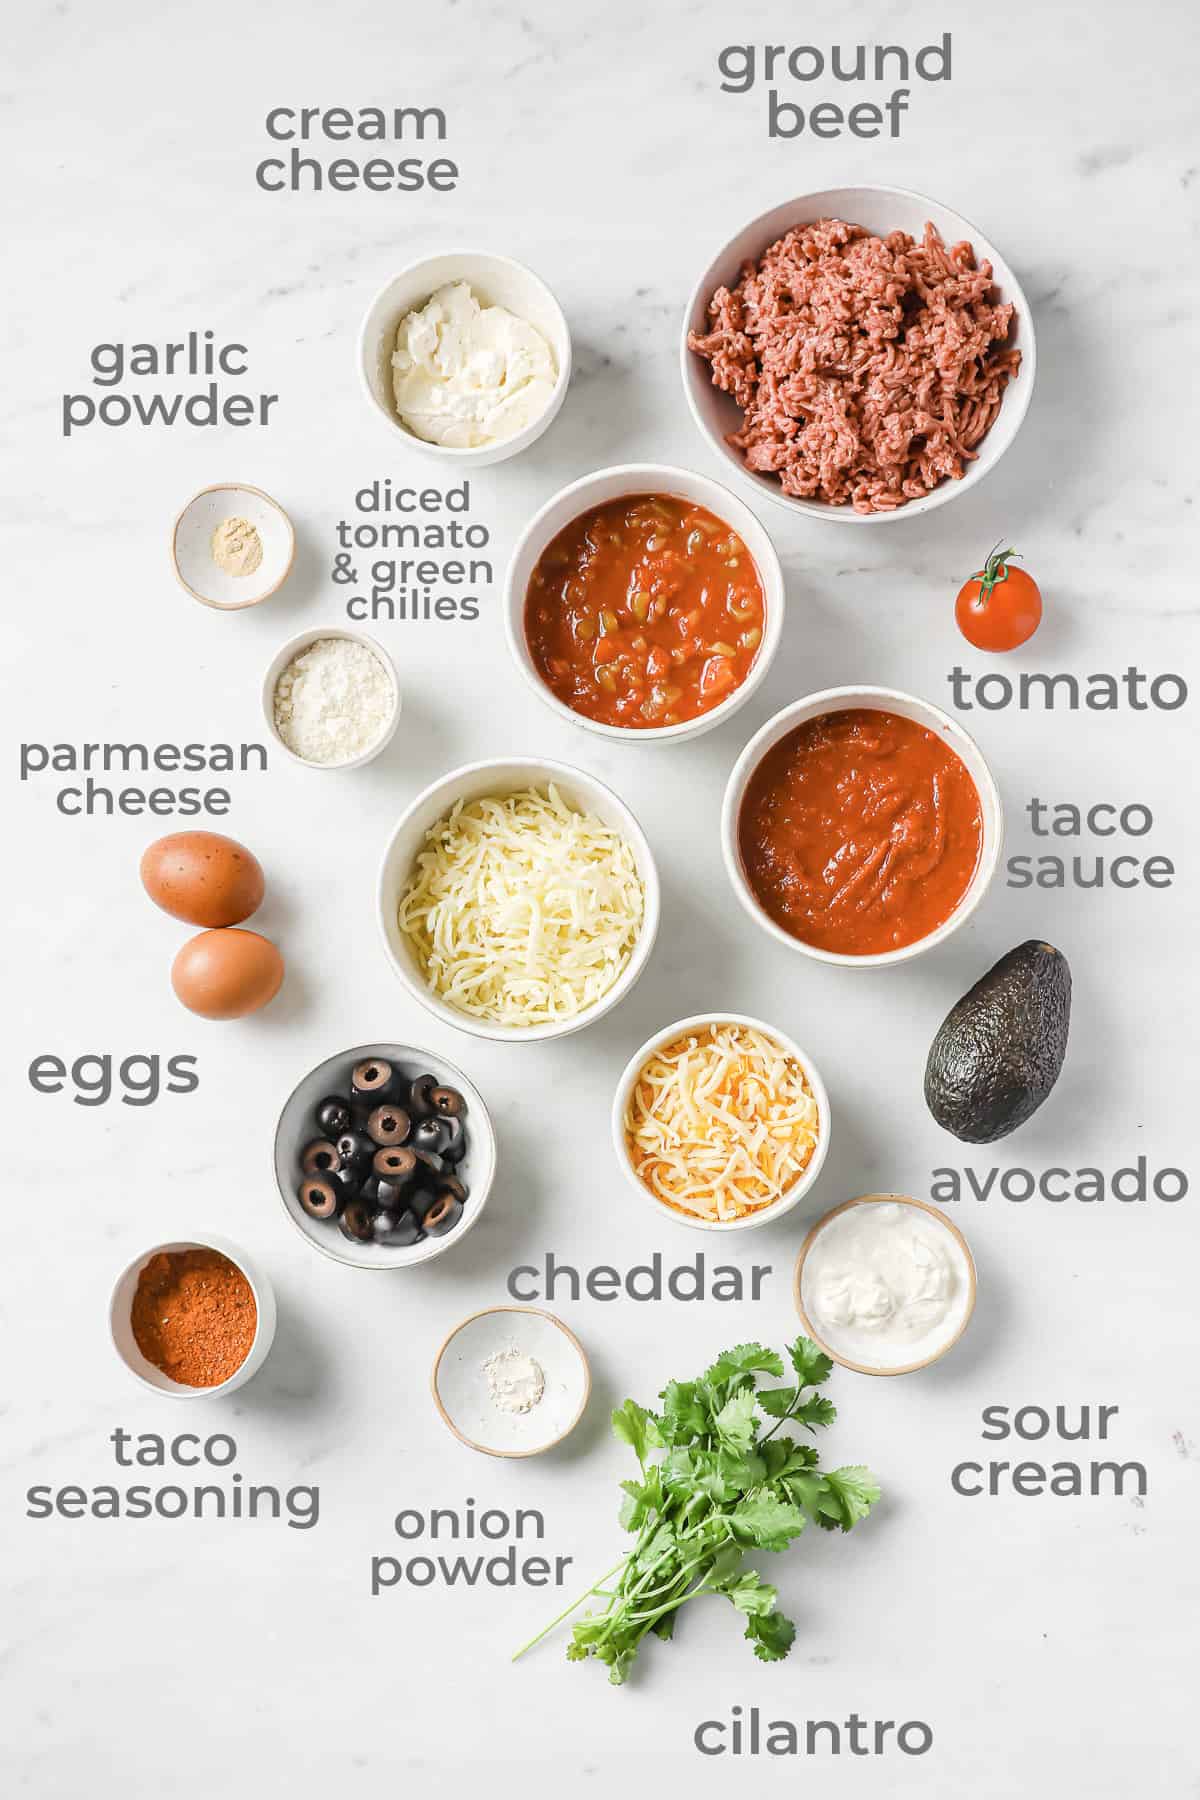 Ingredients all laid out to make a low carb lasagna - ground beef, cheeses, tomatoes, taco sauce, avocado, cilantro.